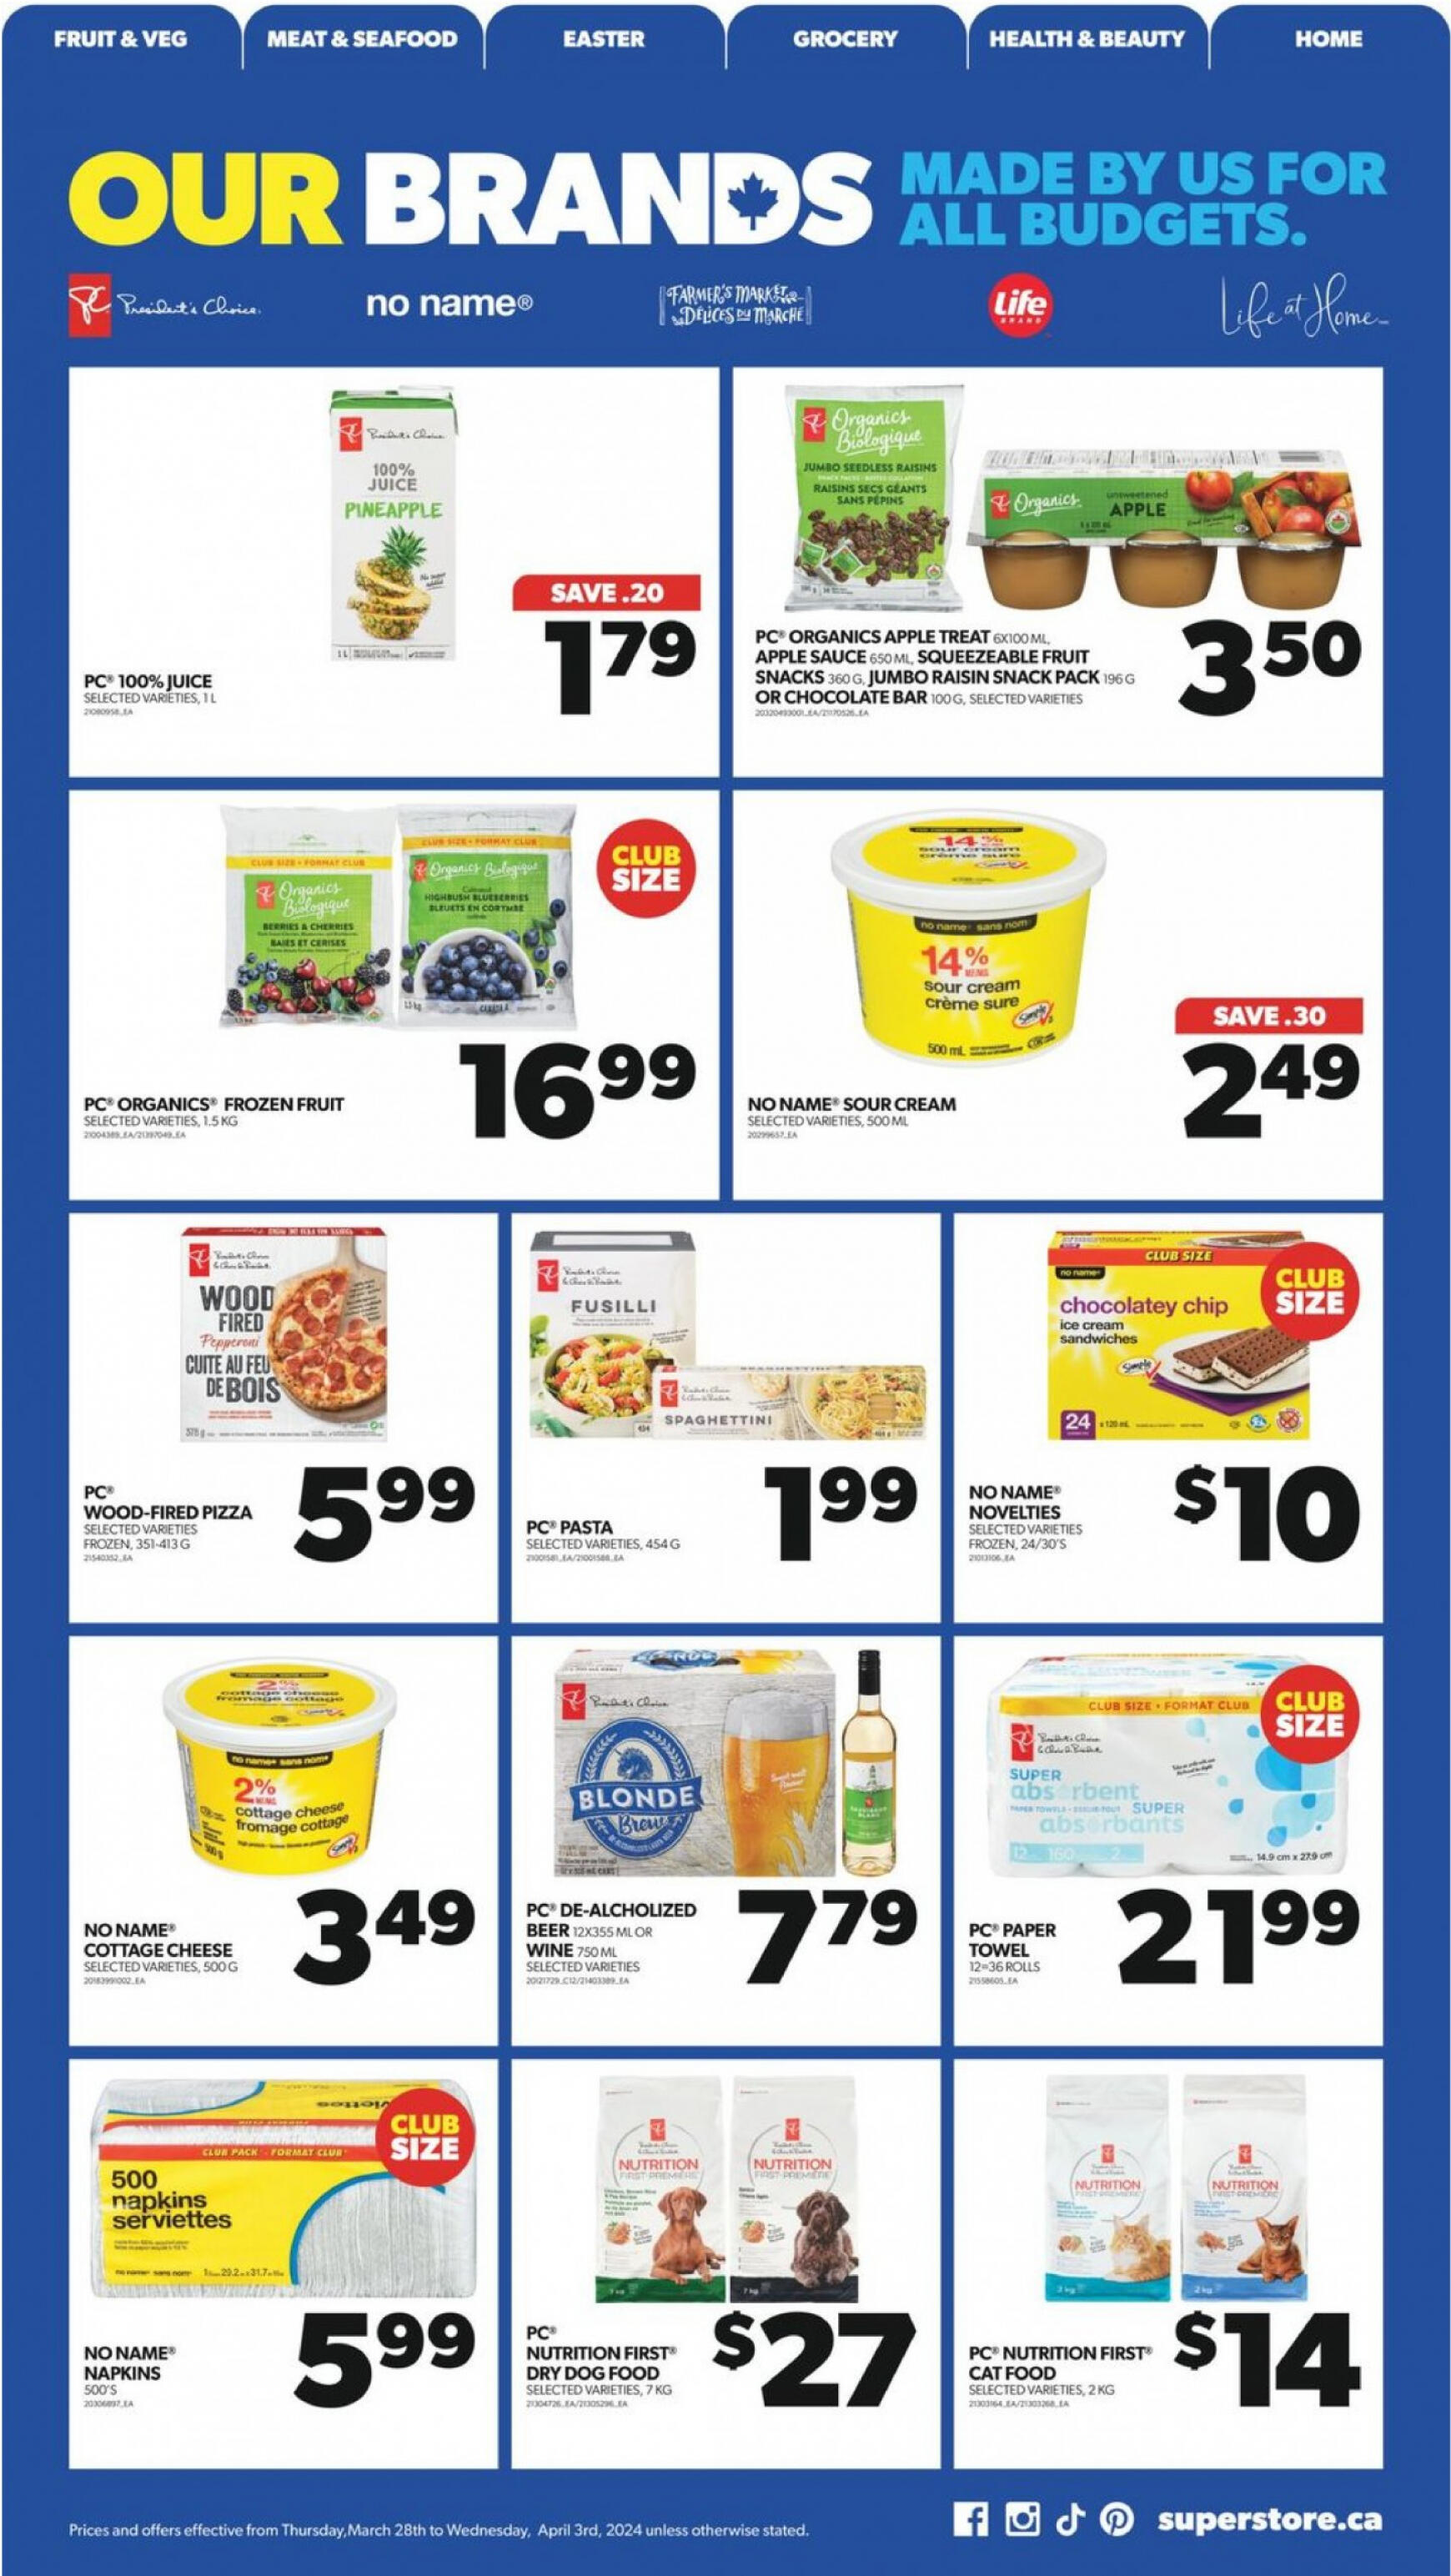 real-canadian-superstore - Real Canadian Superstore flyer current 28.03. - 03.04. - page: 19